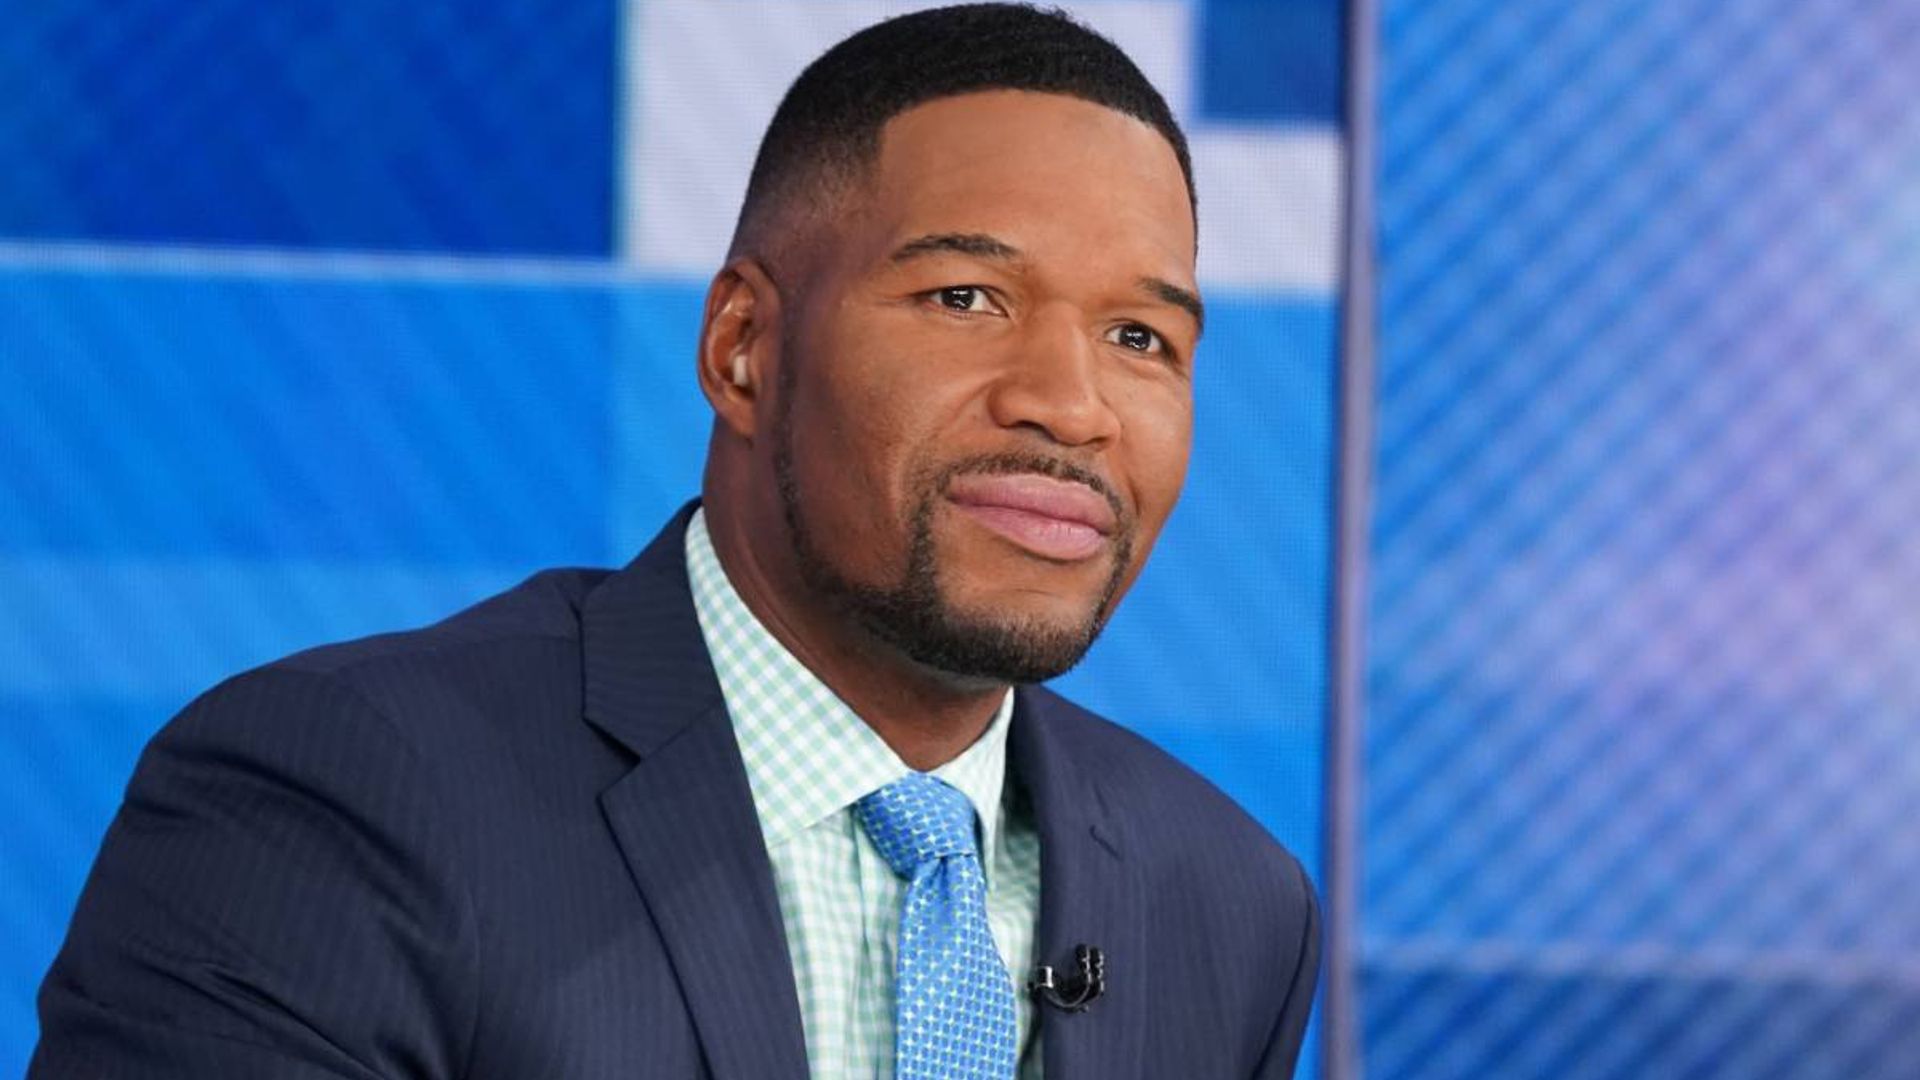 Michael Strahan marks special occasion in personal life following his absence on GMA